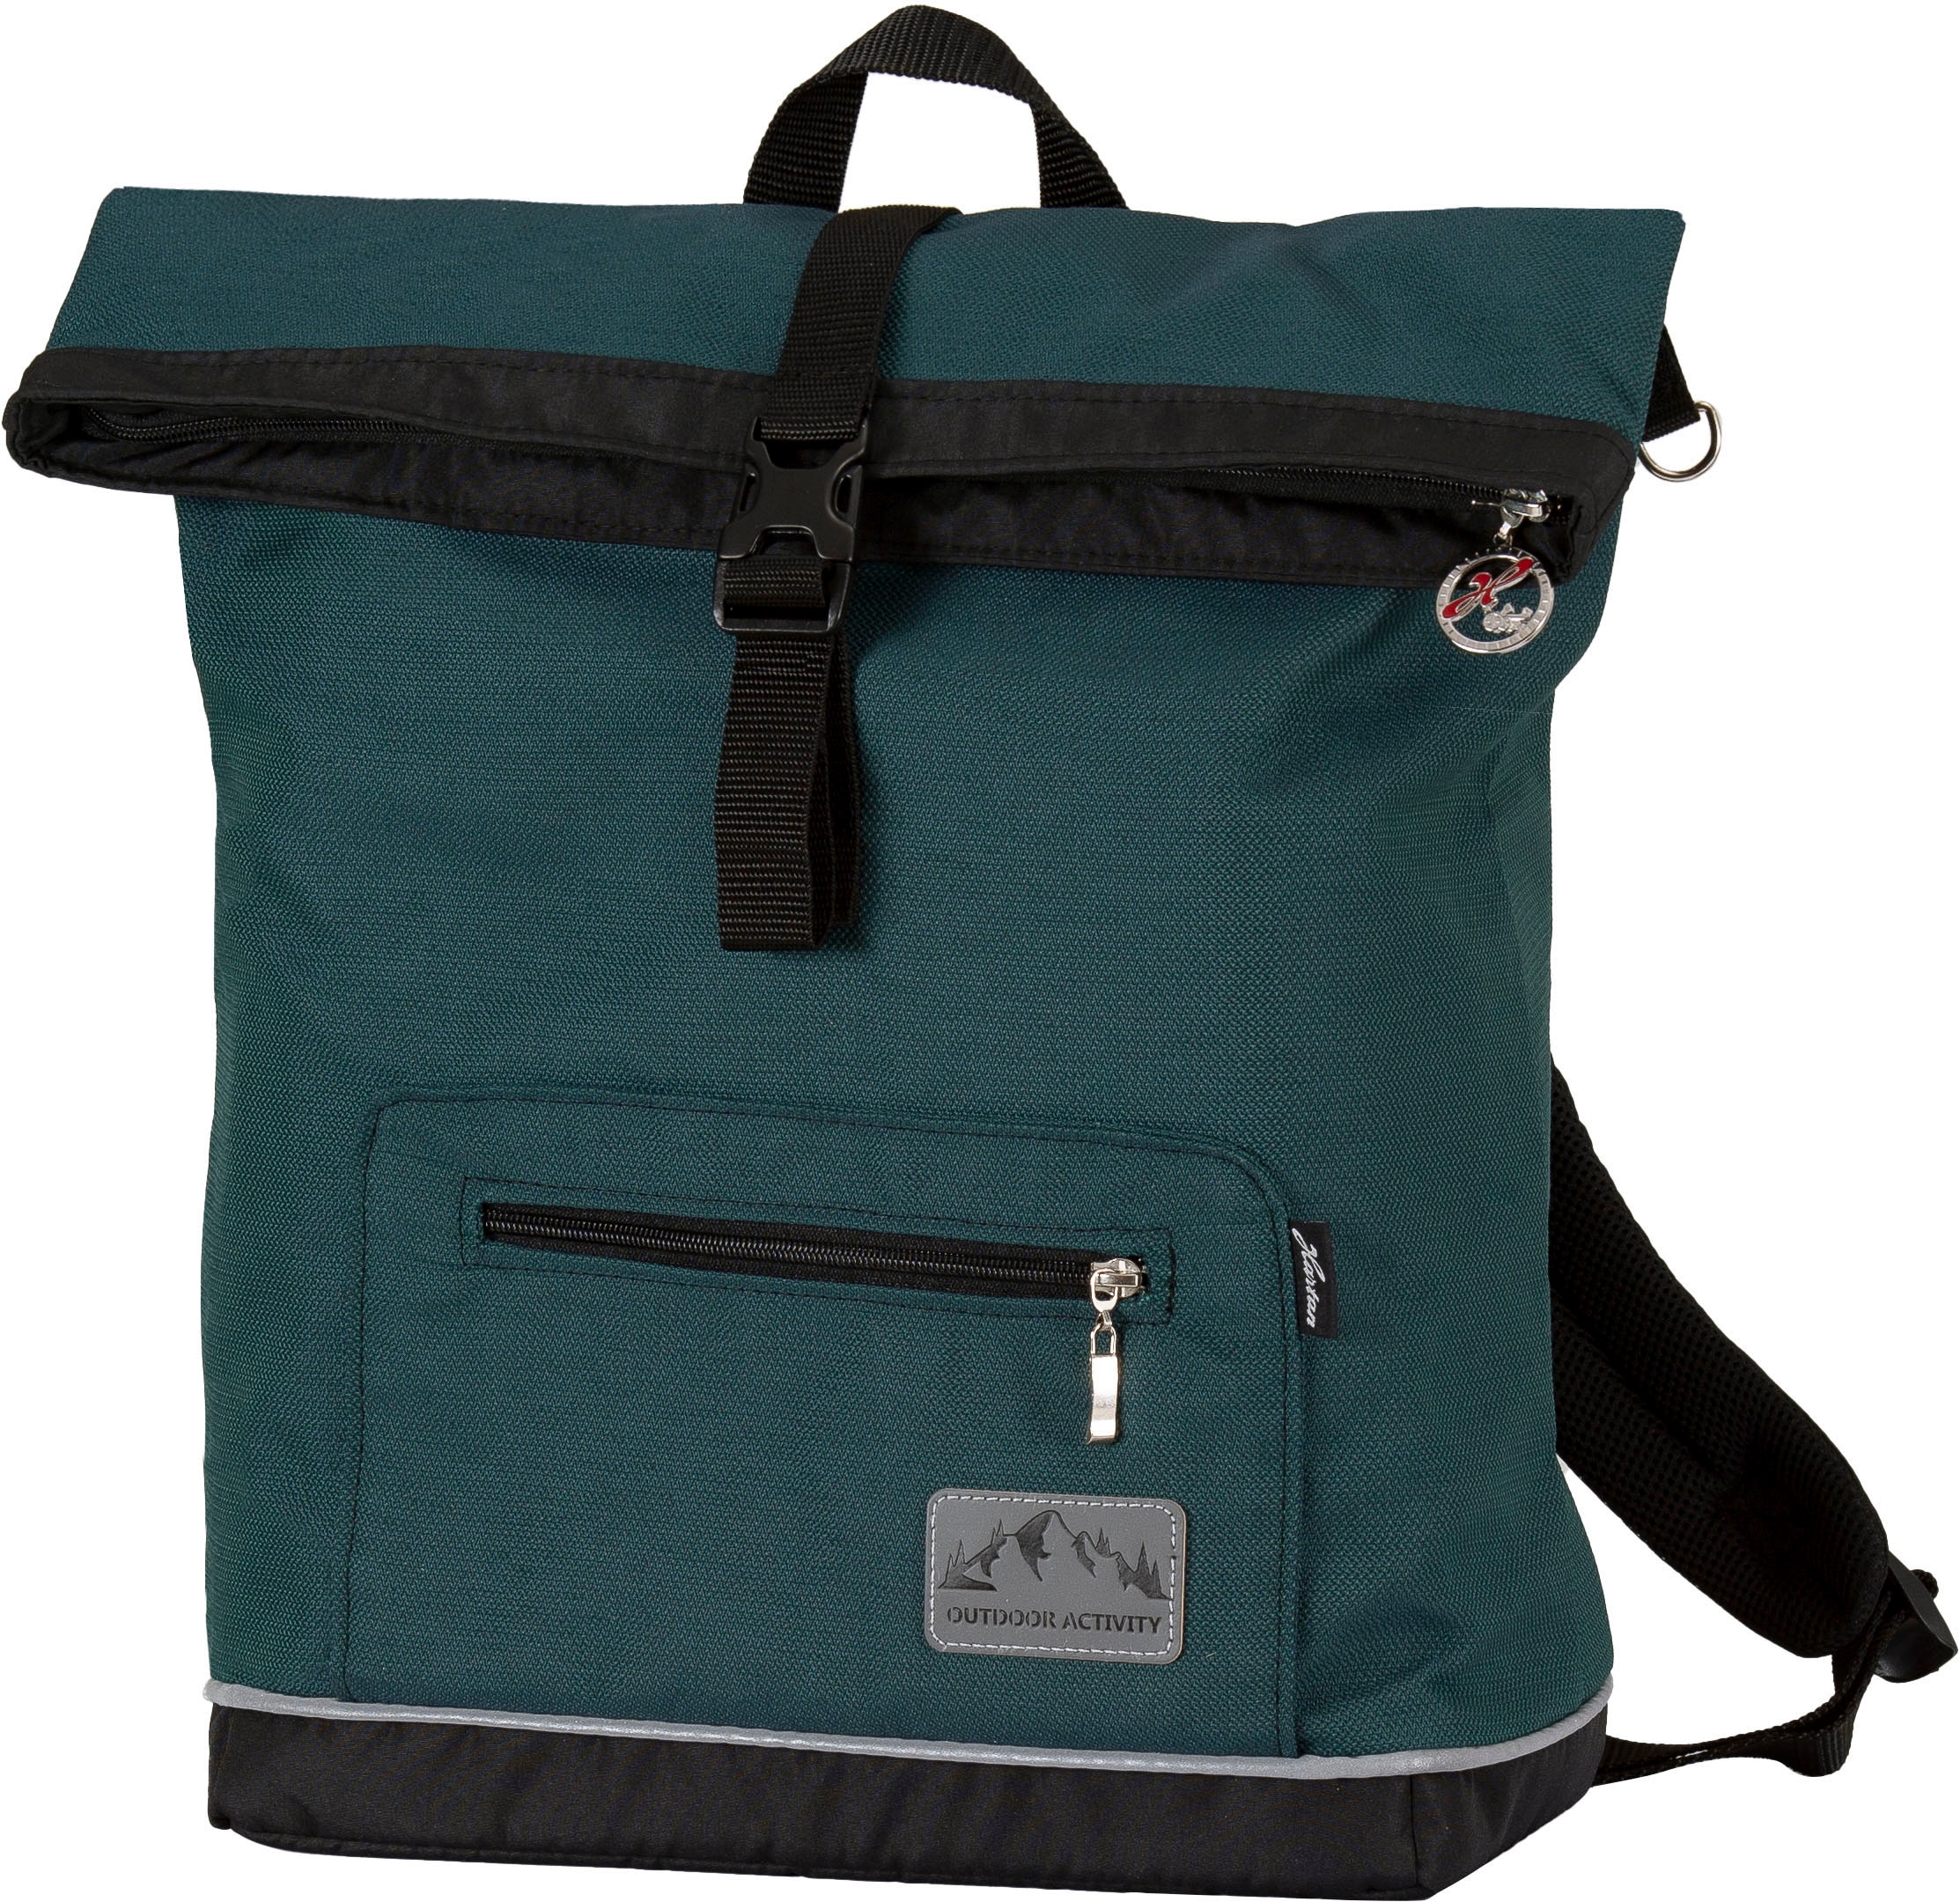 Wickelrucksack »Space bag - Outdoor Activity«, mit Thermofach; Made in Germany